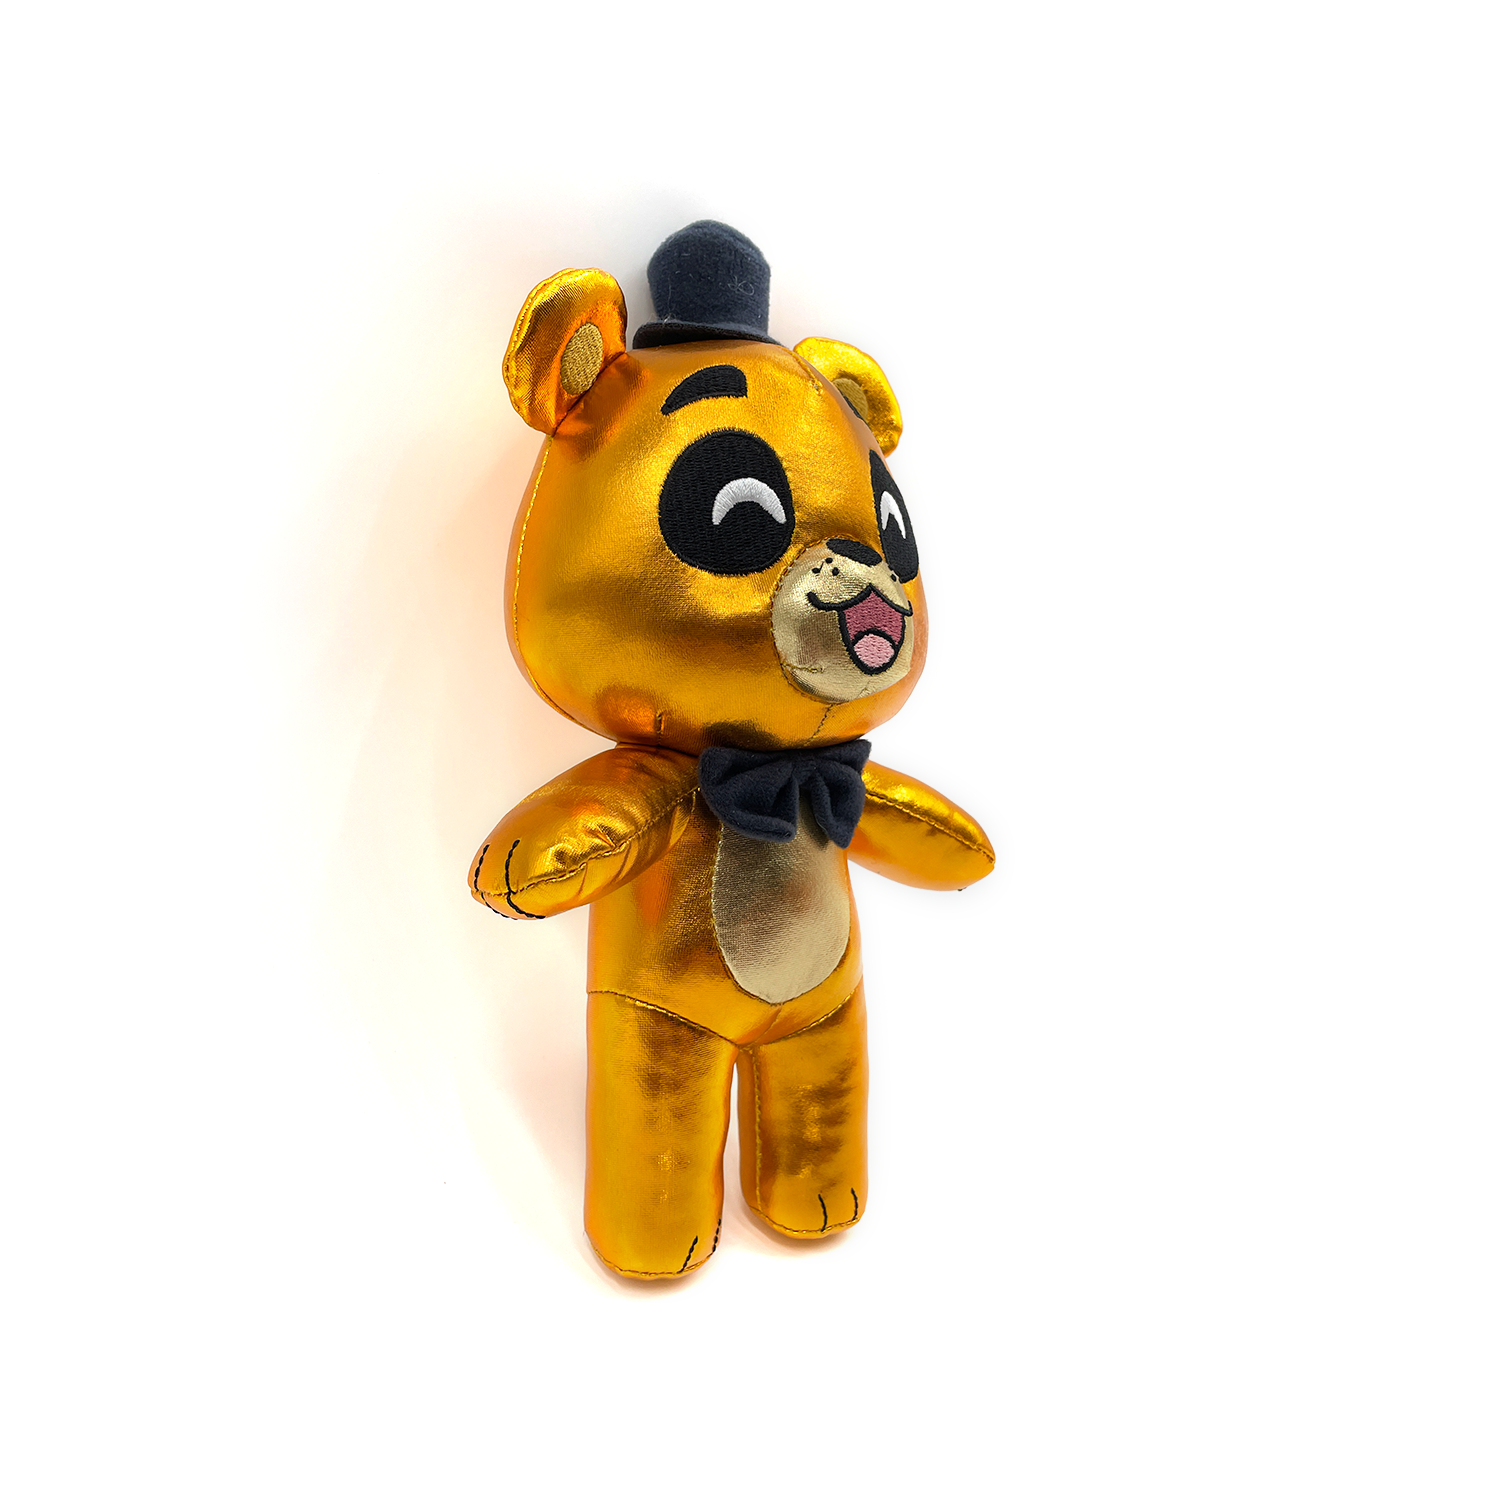 Haunted Golden Freddy Five Nights At Freddys (FNAF) Youtooz Figure, Figurine, Free shipping over £20